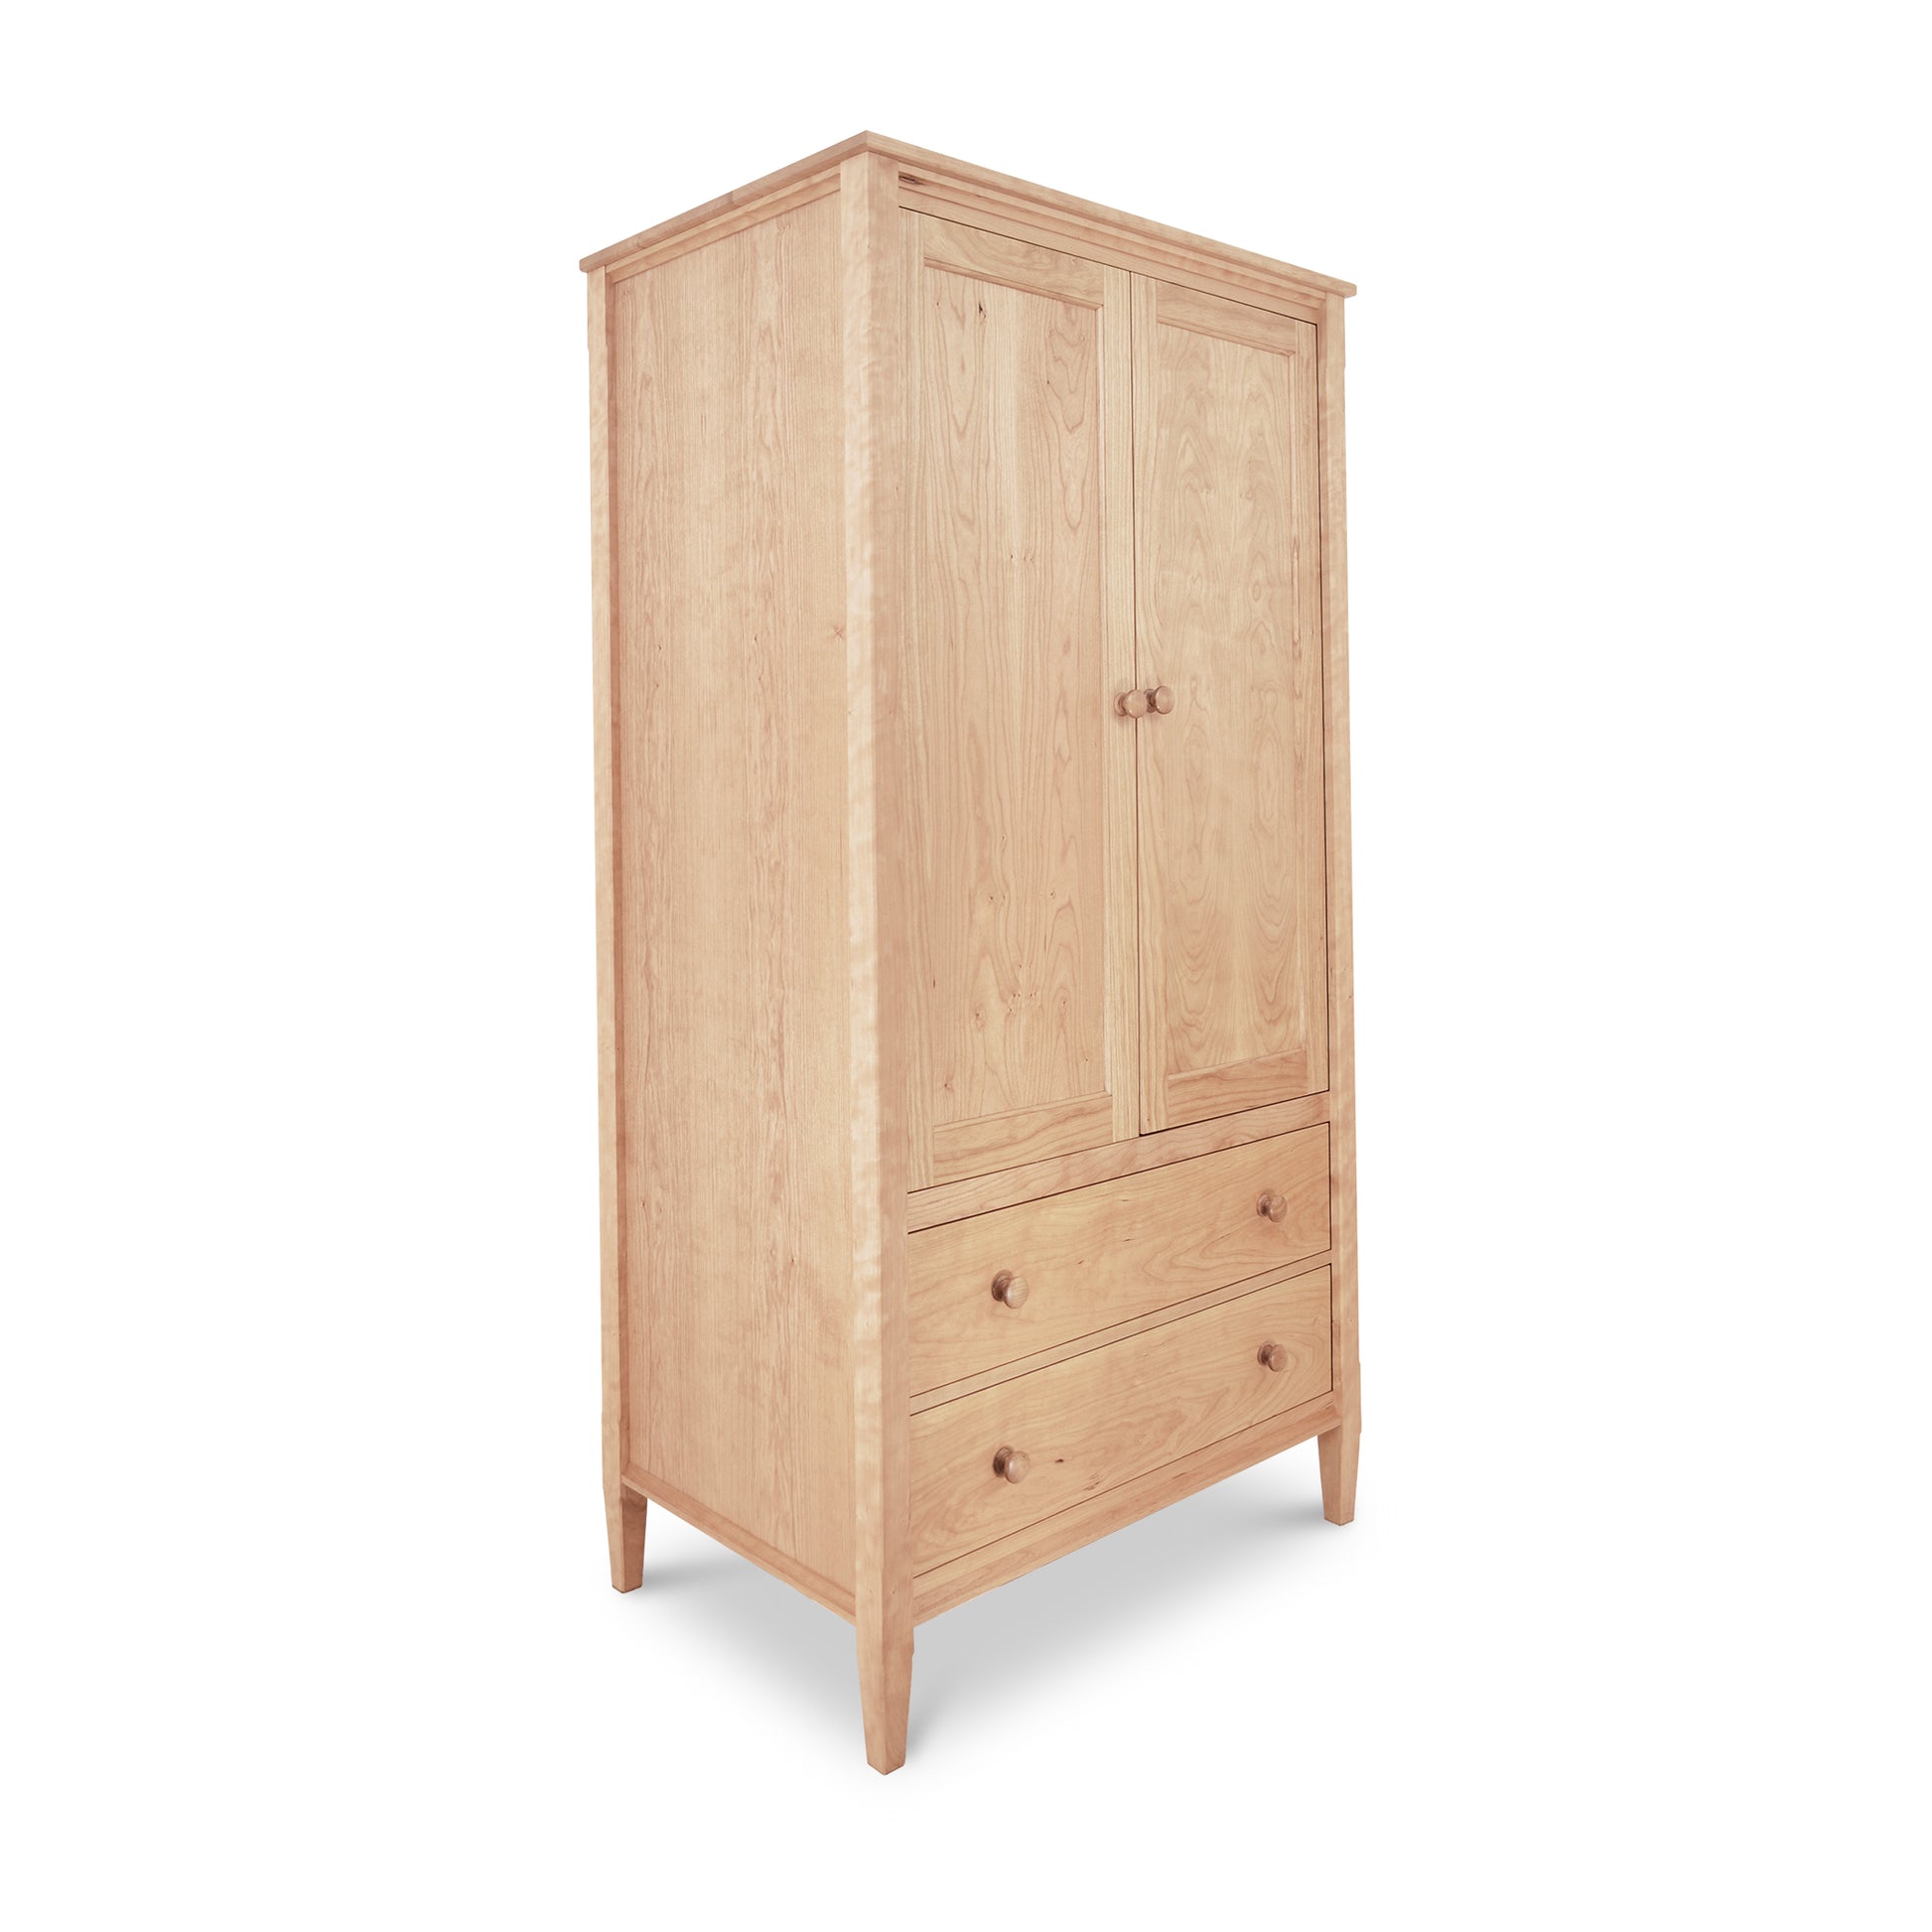 A Vermont Shaker Armoire from Maple Corner Woodworks with a tall, rectangular shape featuring a single large door and a lower drawer, all in a light natural wood finish, isolated on a white background.